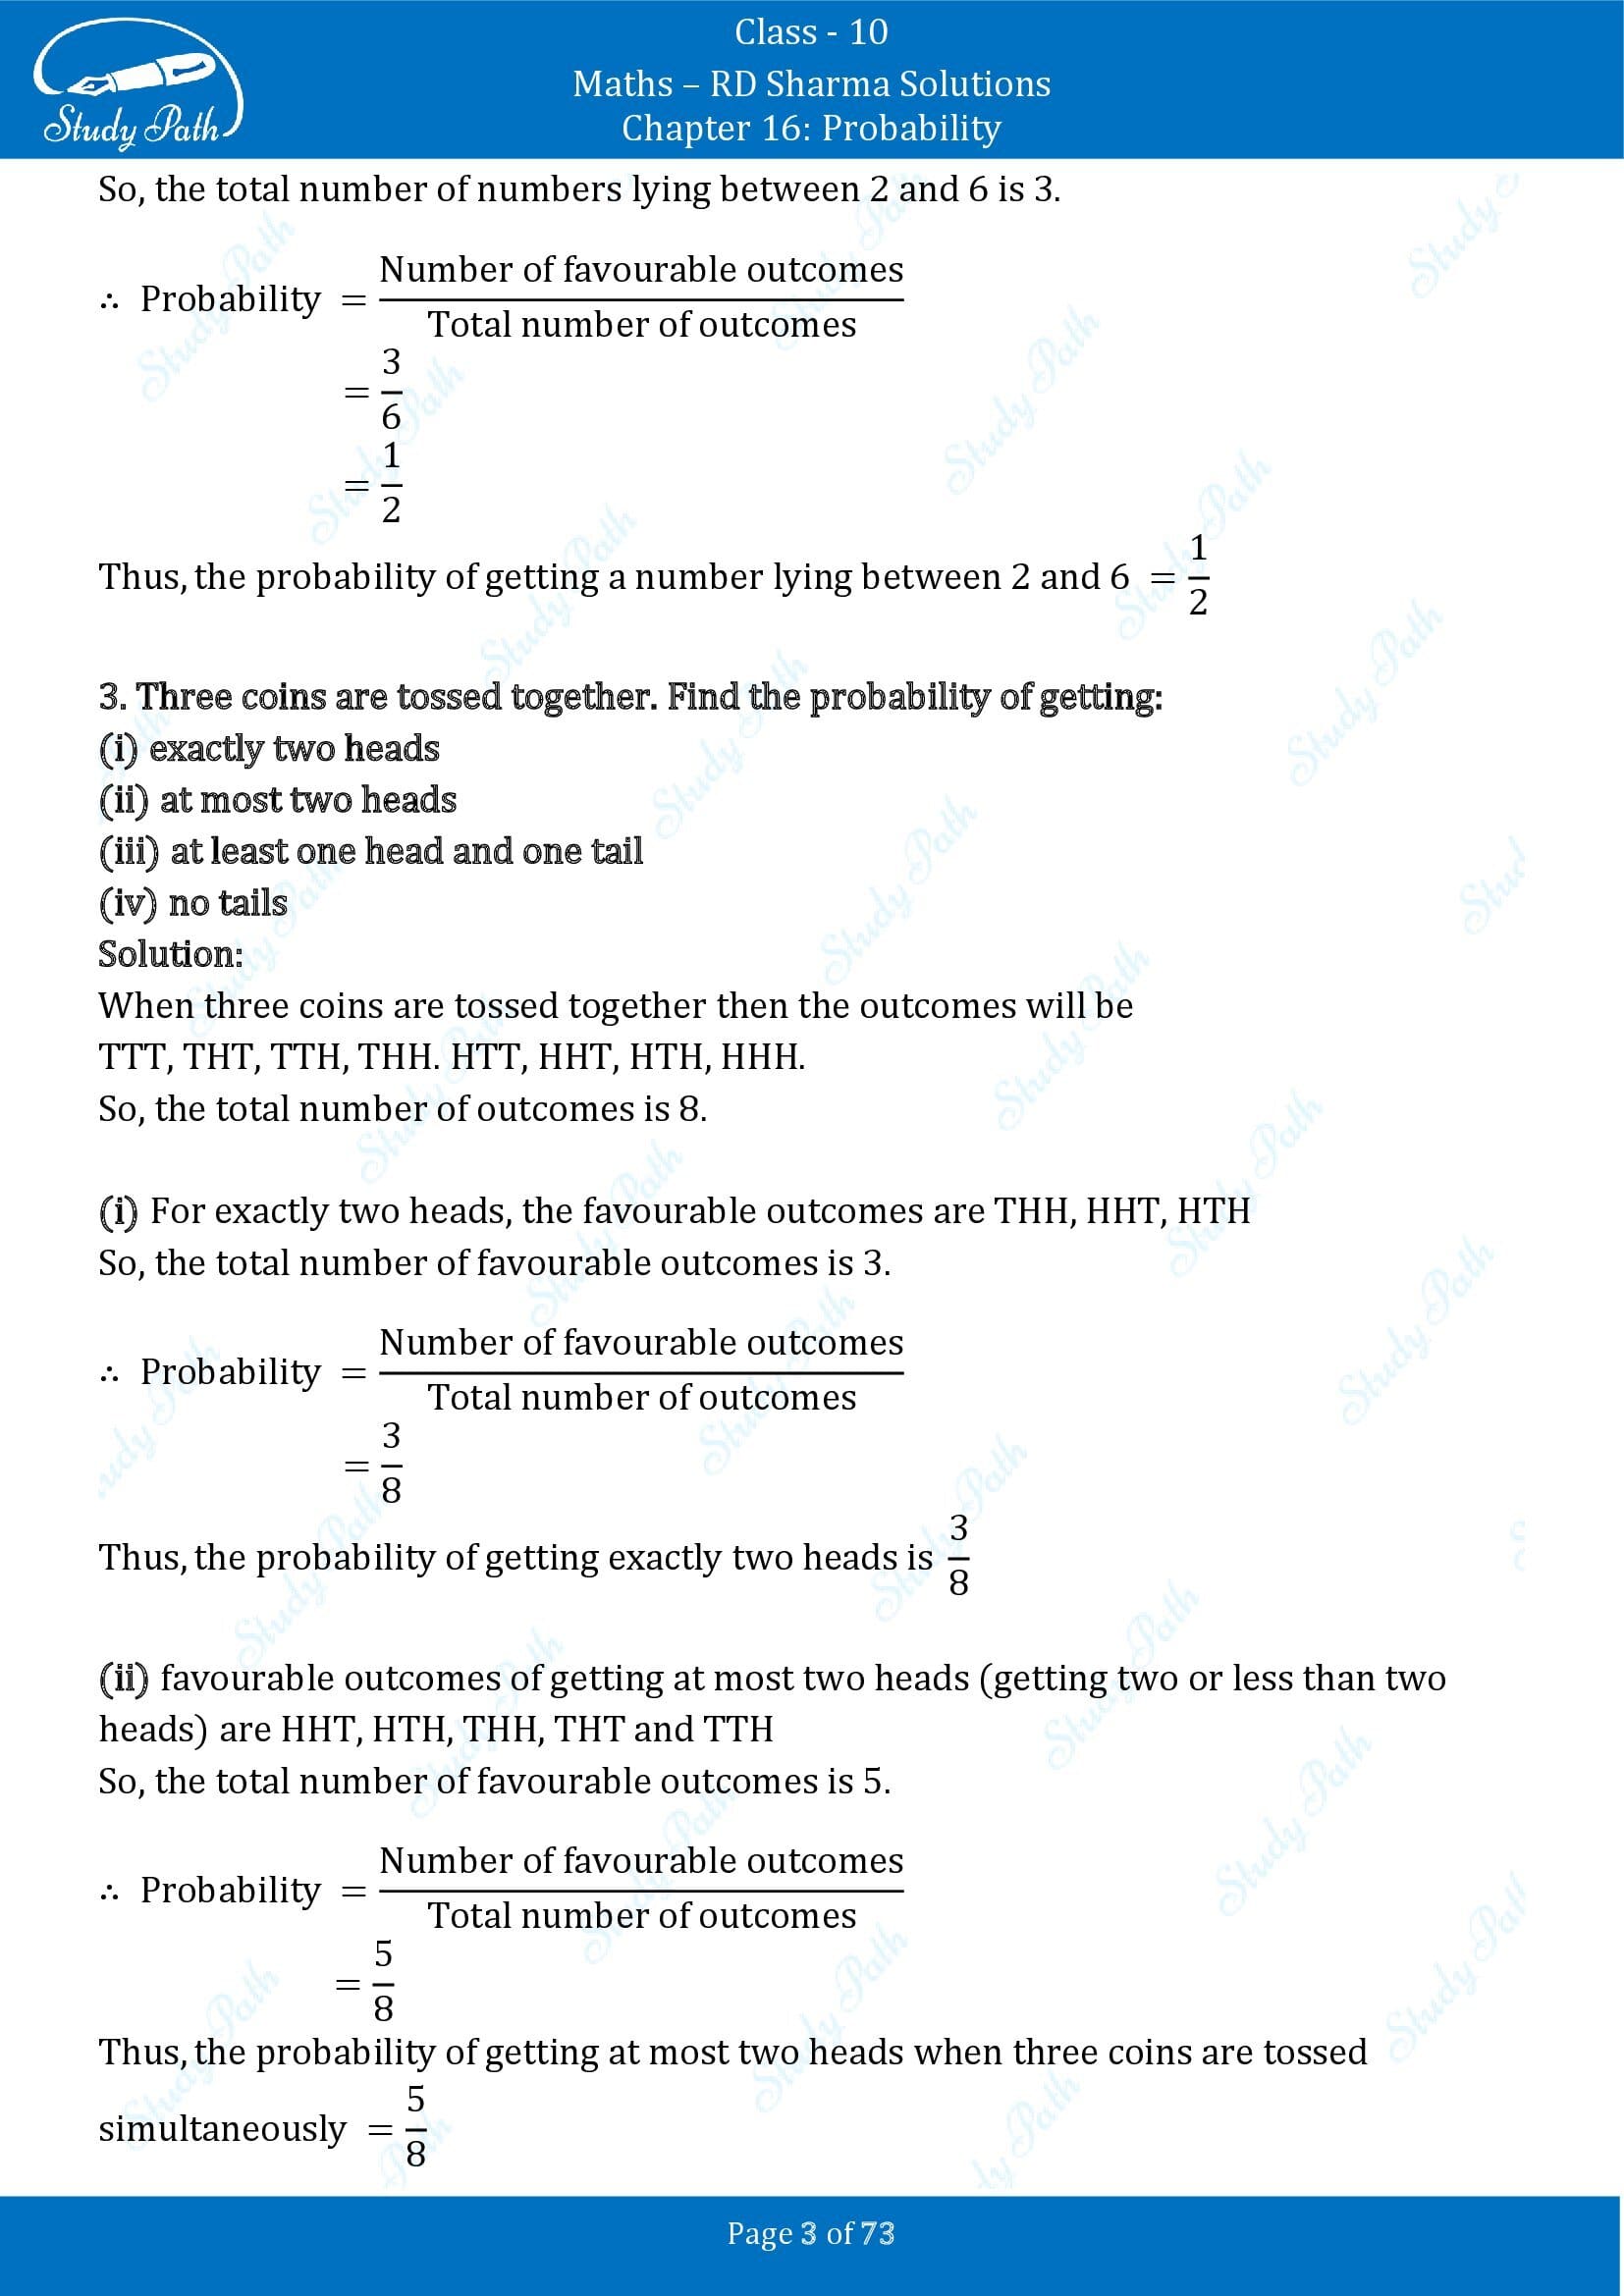 RD Sharma Solutions Class 10 Chapter 16 Probability Exercise 16.1 00003